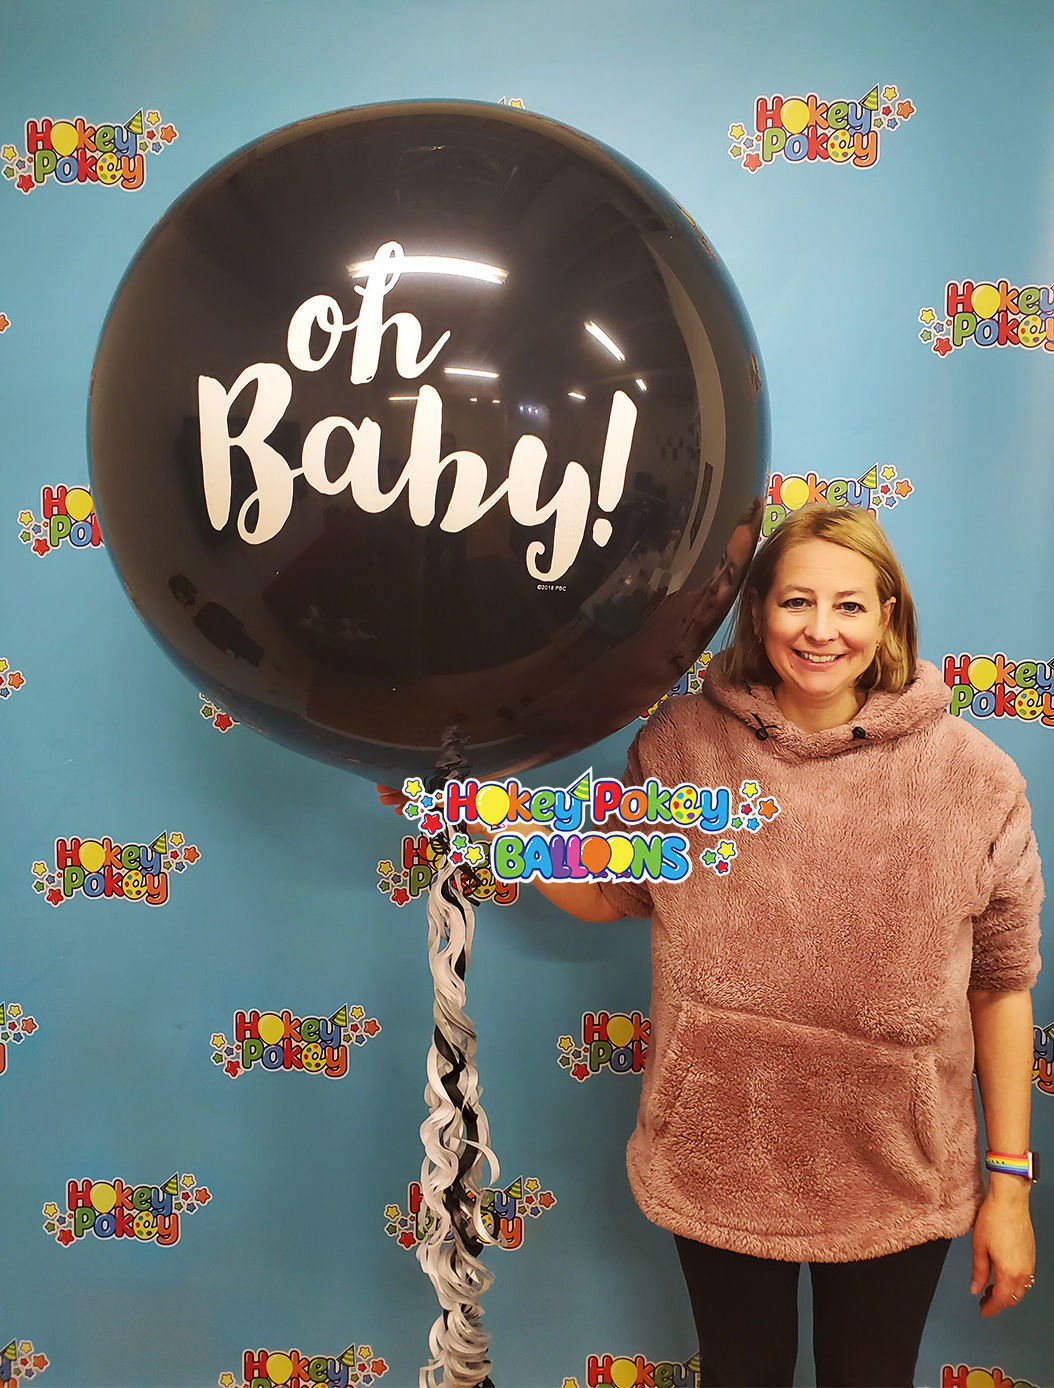 Picture of Oh Baby! Gender Reveal  Giant Black Balloon (helium-filled)